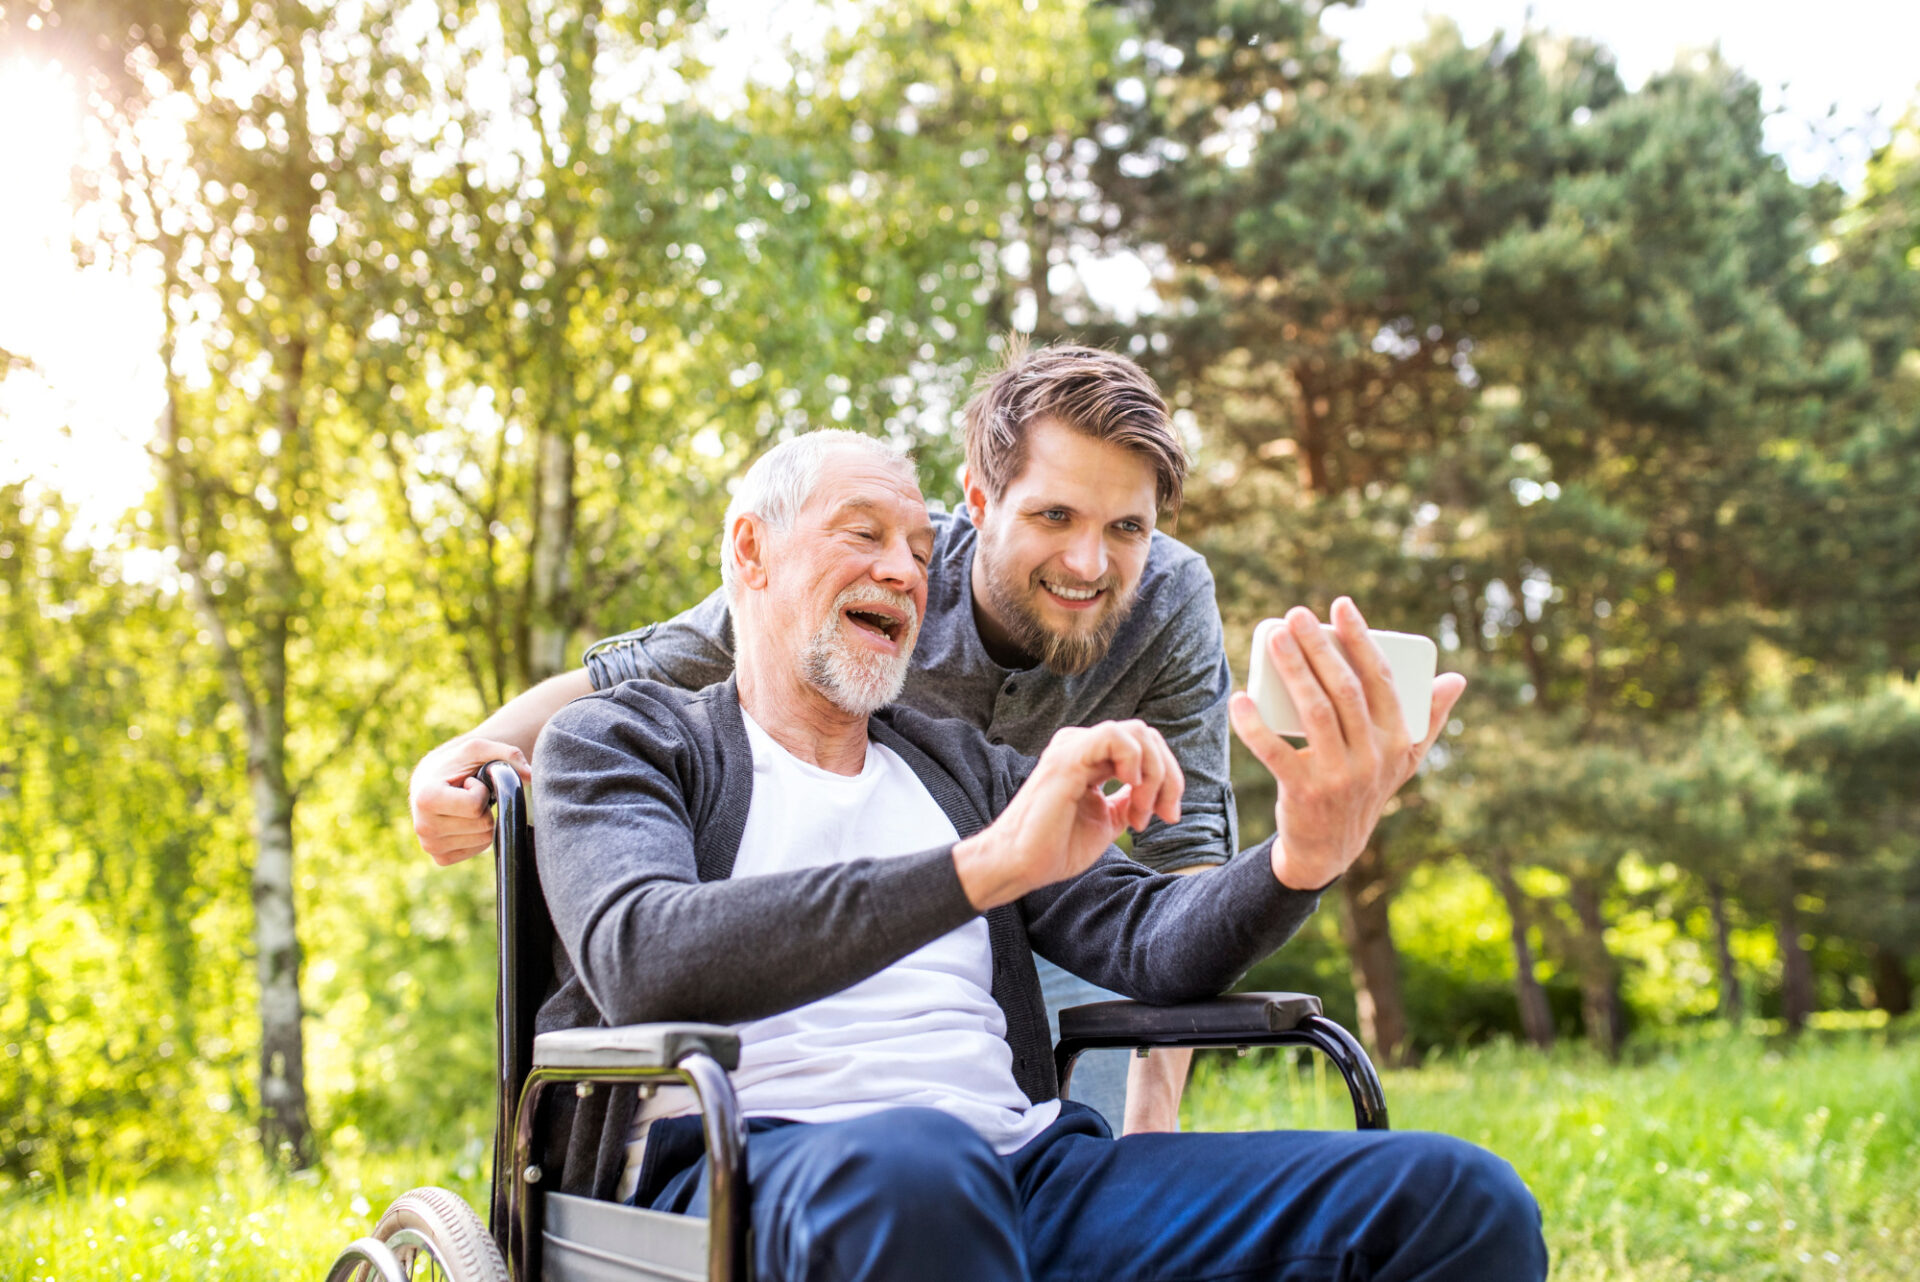 3 Keys to Helping Elderly Parents Age With Dignity